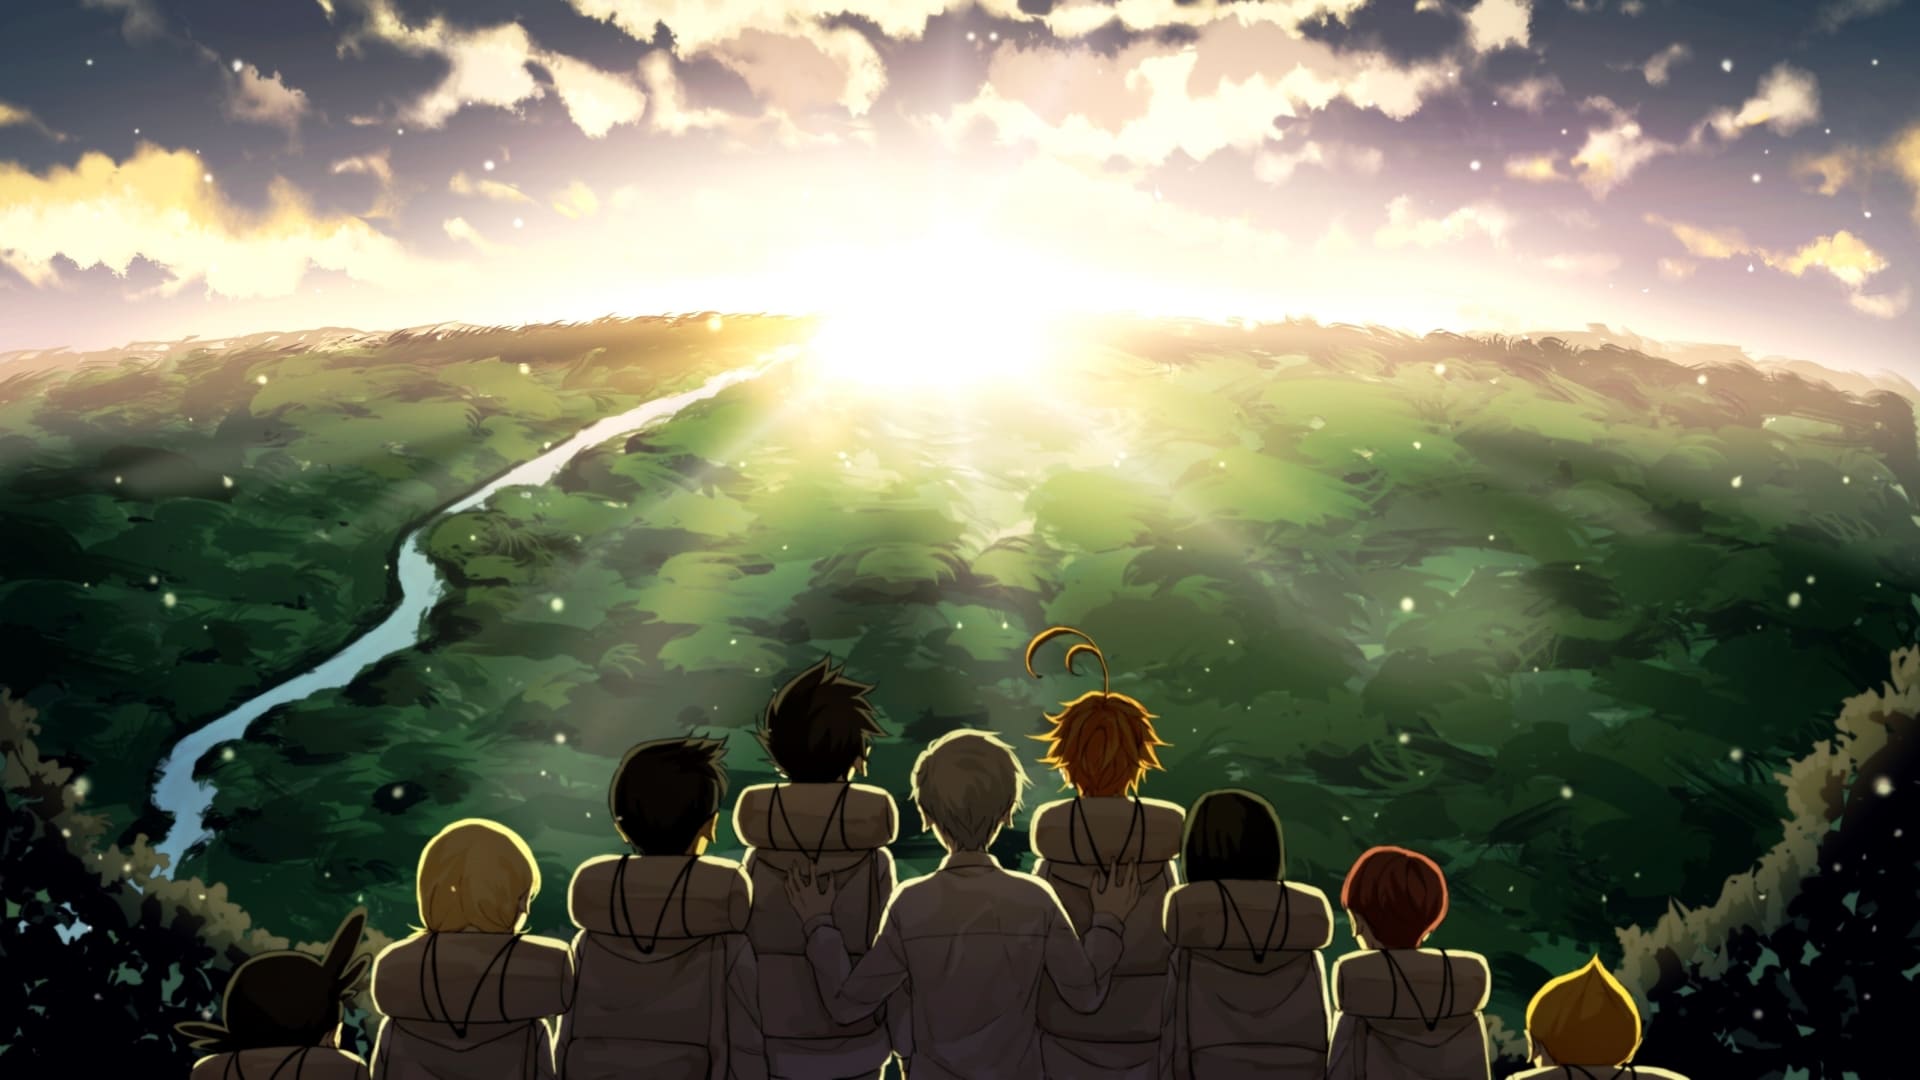 The Promised Neverland Wallpaper Images 1